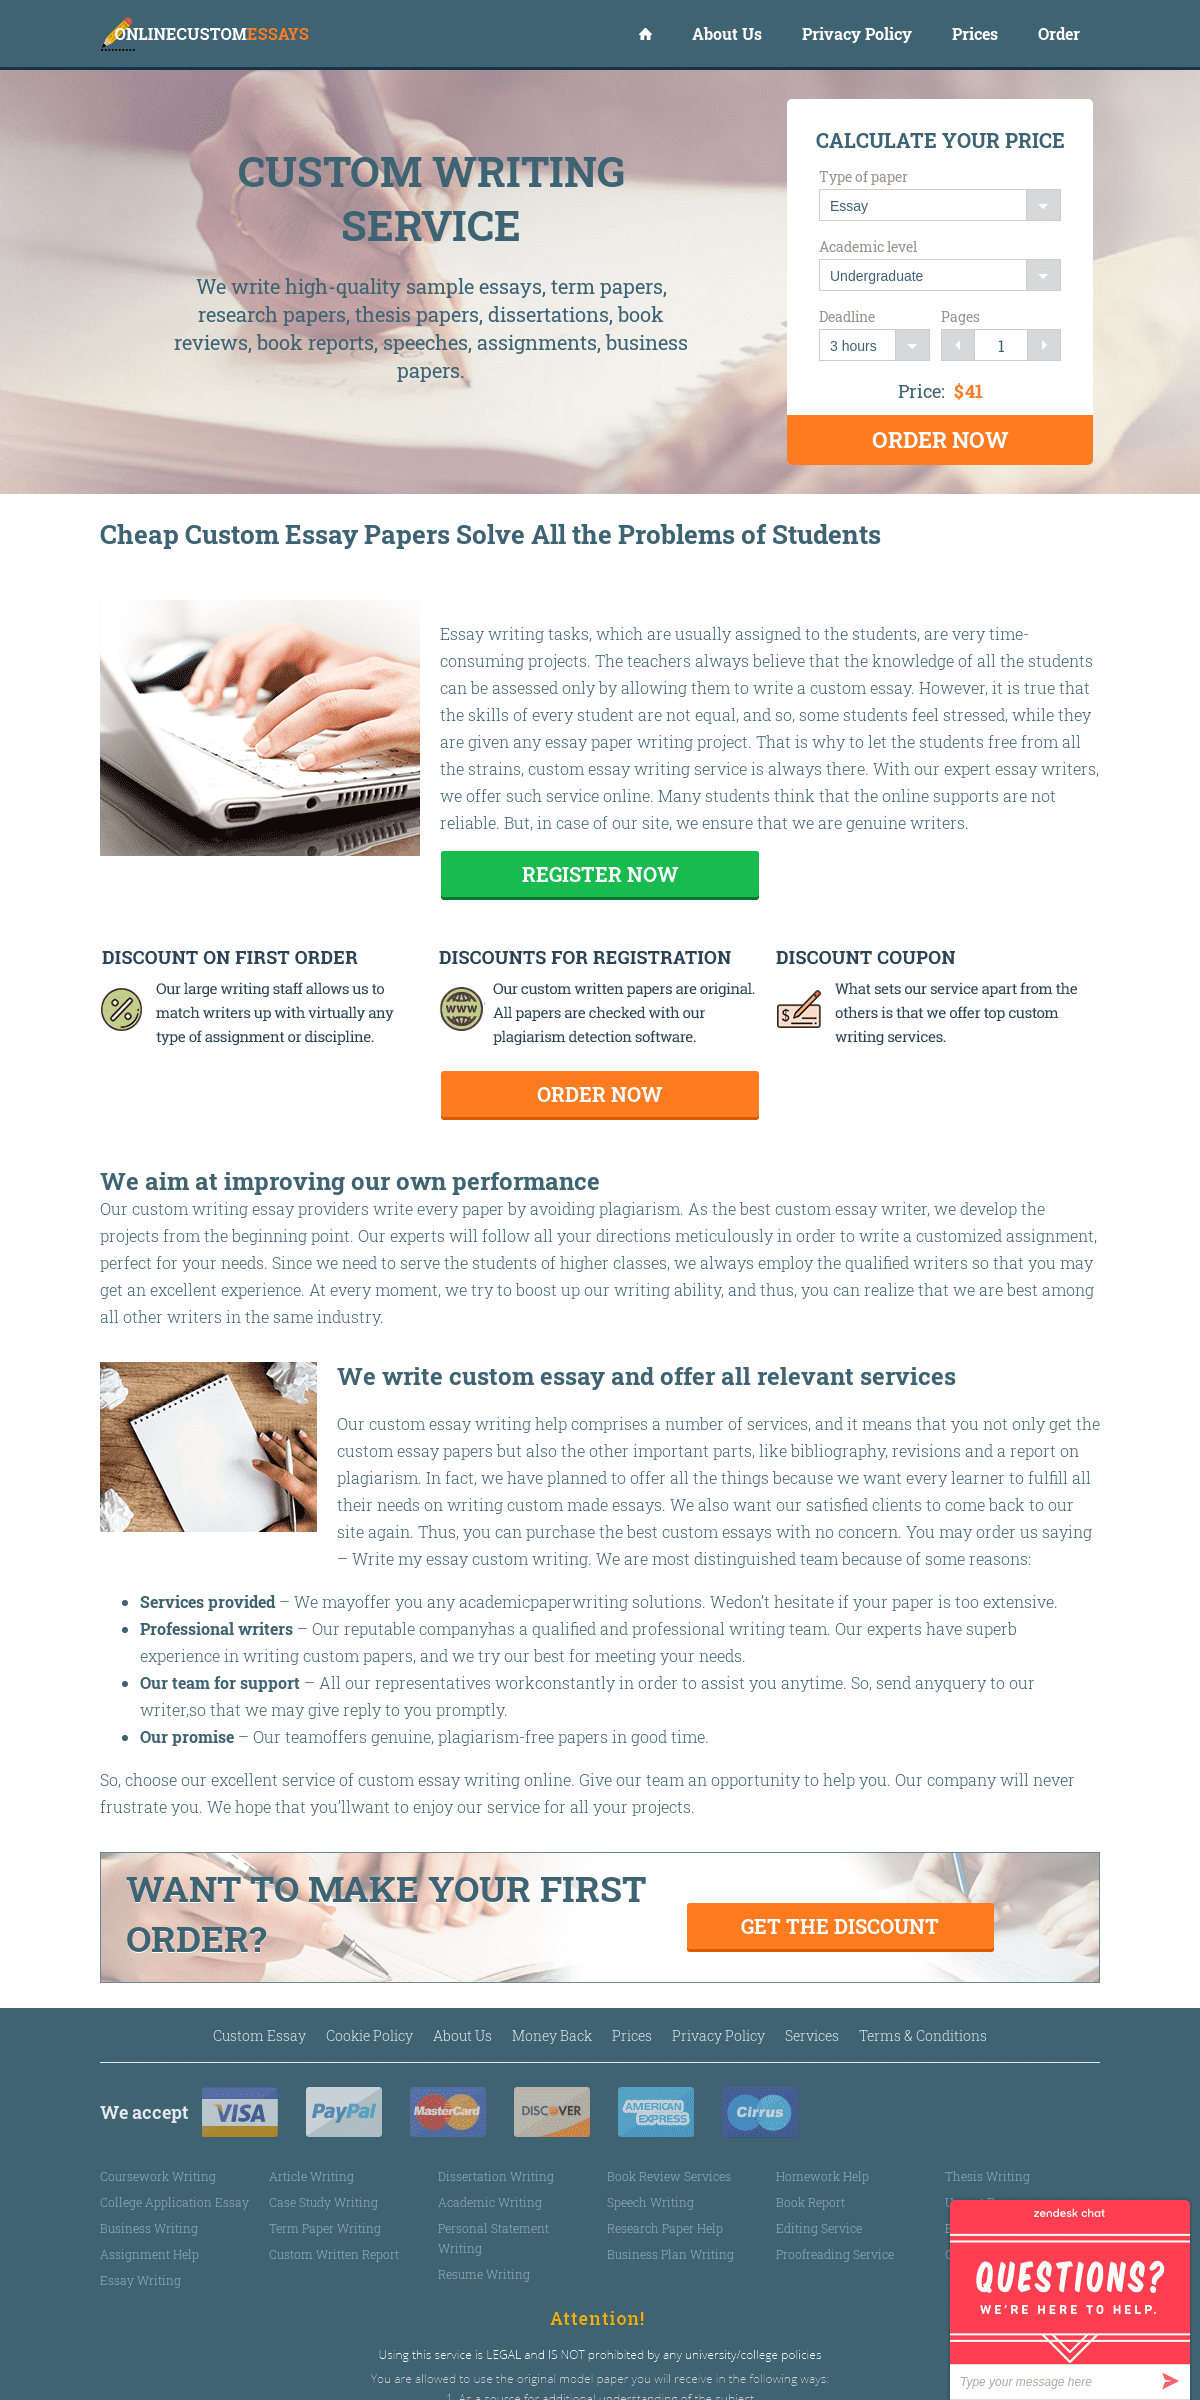 A complete backup of onlinecustomessays.com